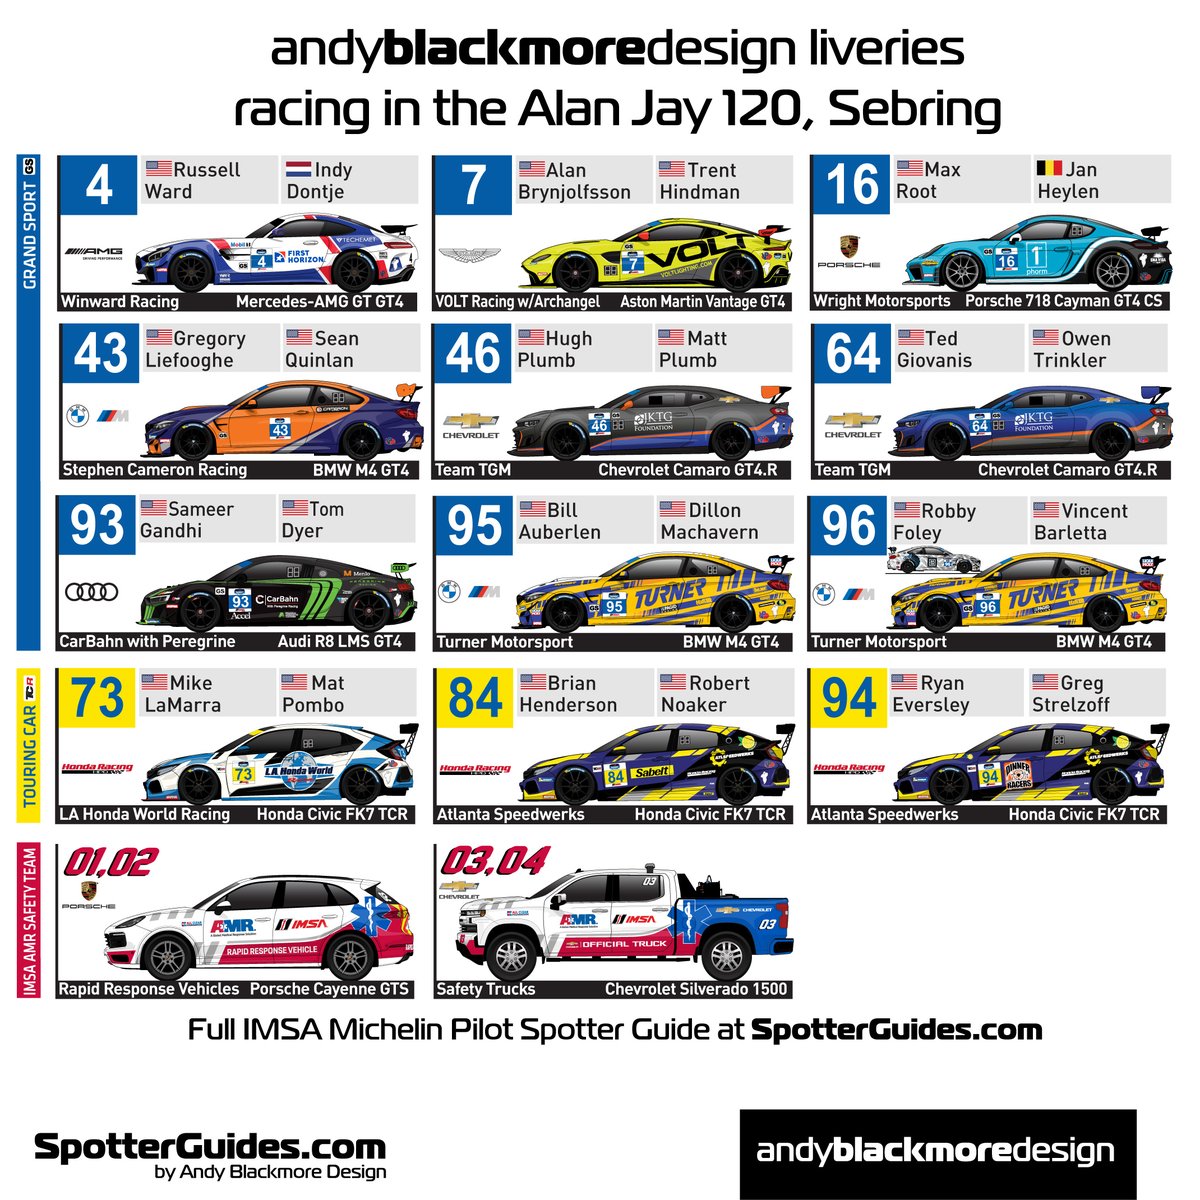 15mins in for the #IMSA #IMPC race at #Sebring. Here are the #ABD #Liveries racing today. Hopefully we won't see the safety cars much!